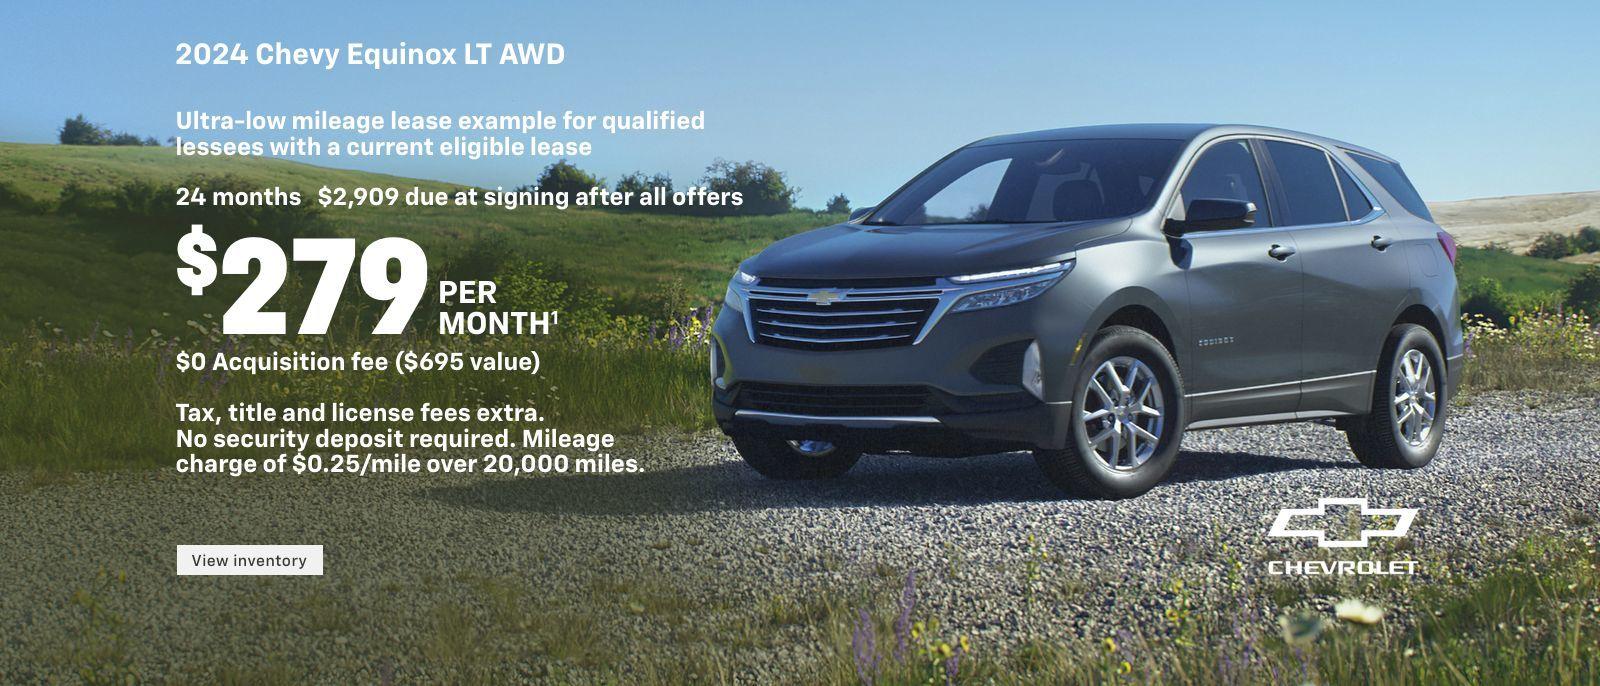 2024 Chevy Equinox LT AWD. Ultra-low mileage lease example for qualified lessees with a current eligible lease. $279 per month. 24 months. $2,909 due at signing after all offers. $0 Acquisition fee ($695 value). Tax, title and license fees extra. No security deposit required. Mileage charge of $0.25/mile over 20,000 miles.